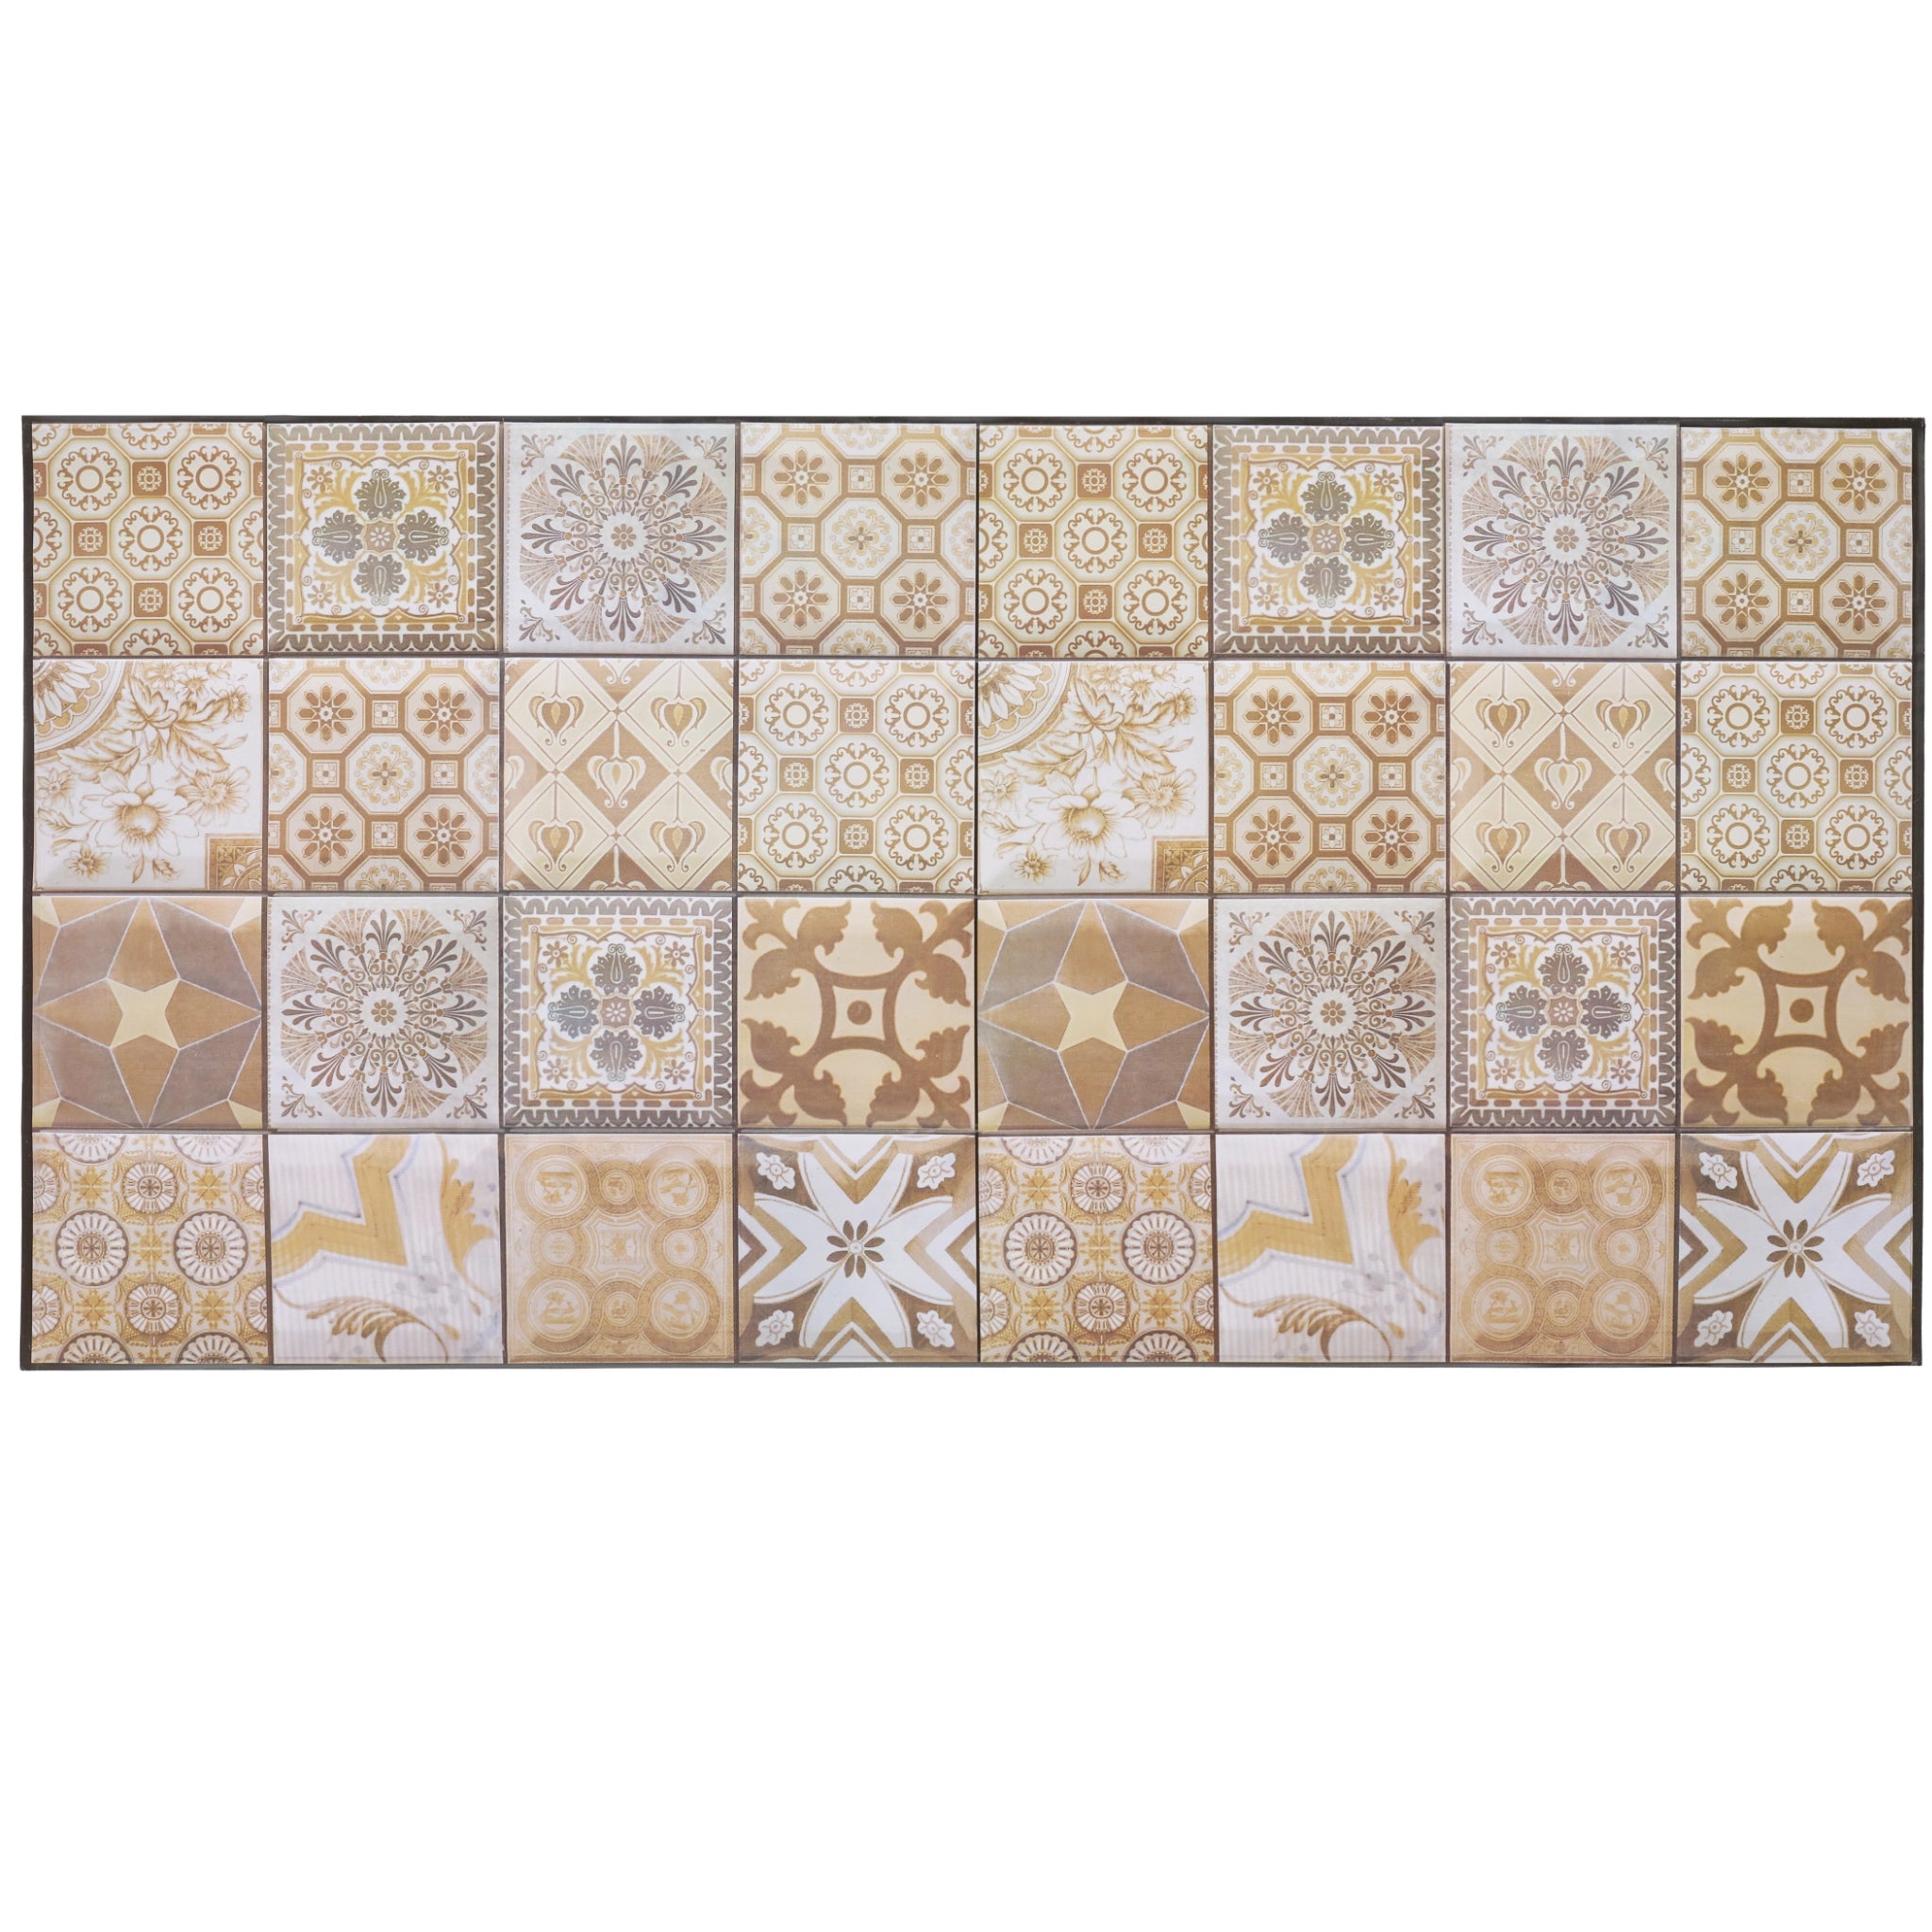 Brown wall panel with geometric patterns, close-up view